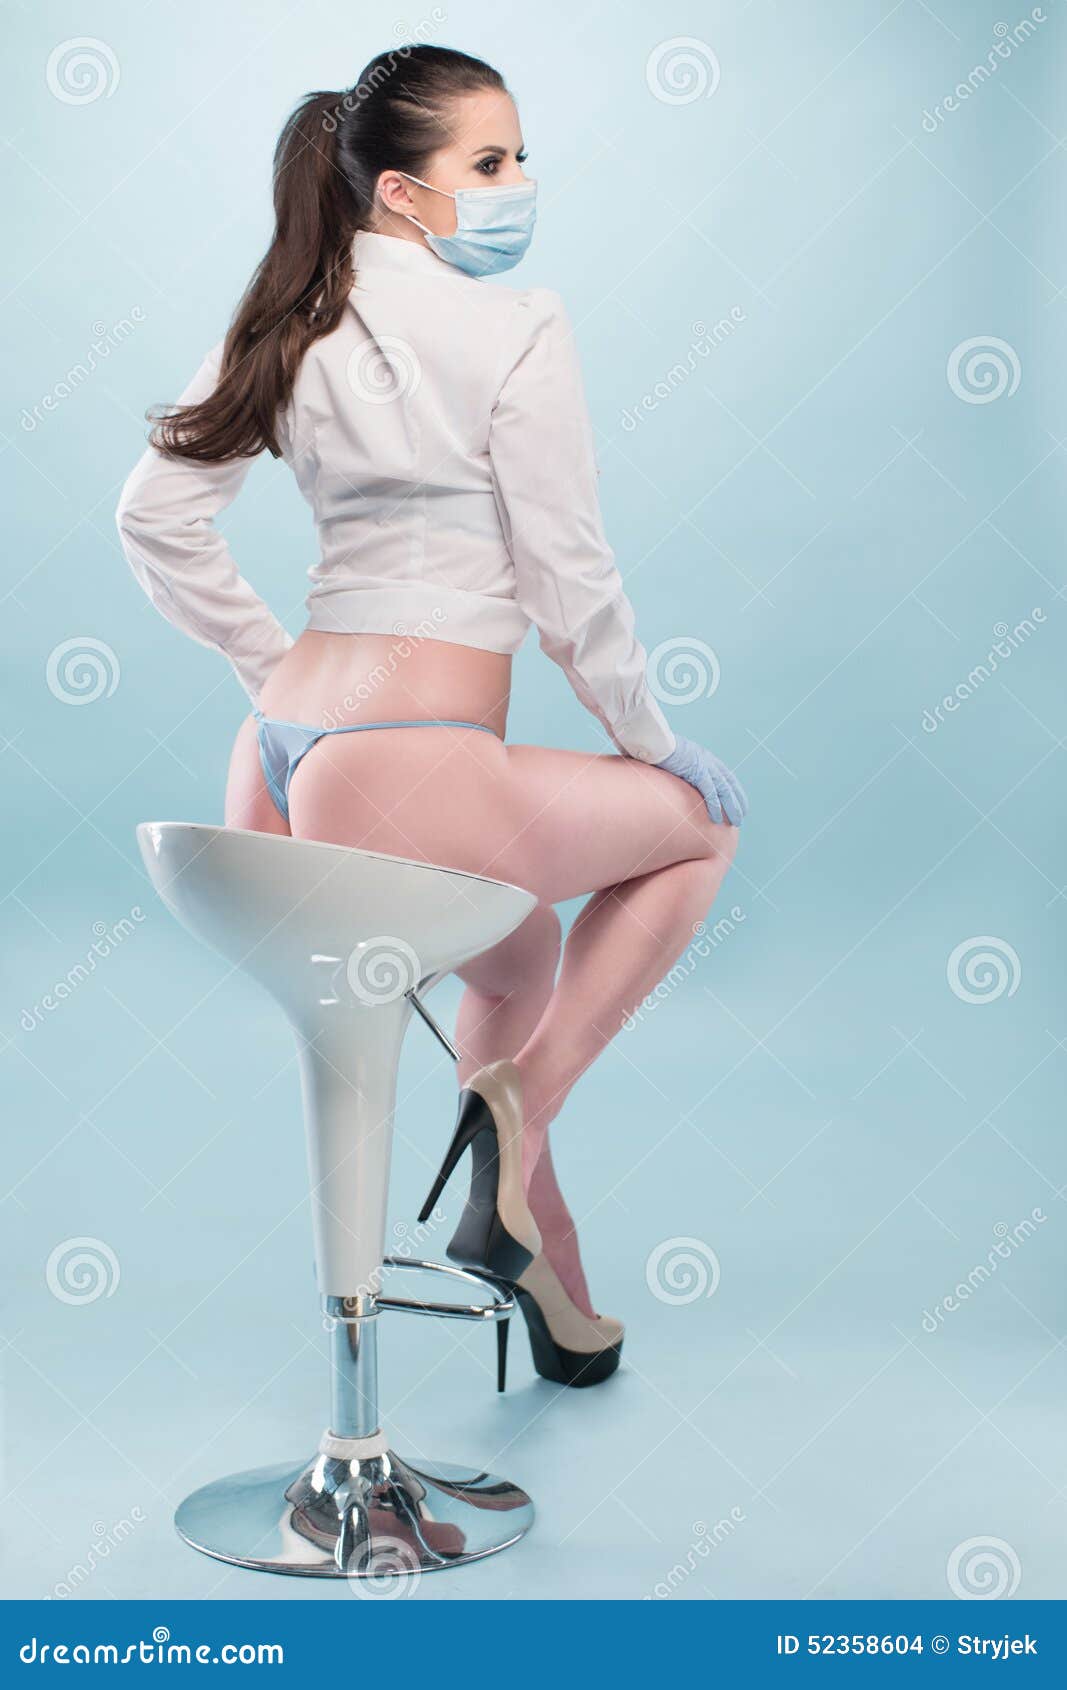 Nurse in Shirt and Panties Sitting on a Stool Stock Photo - Image